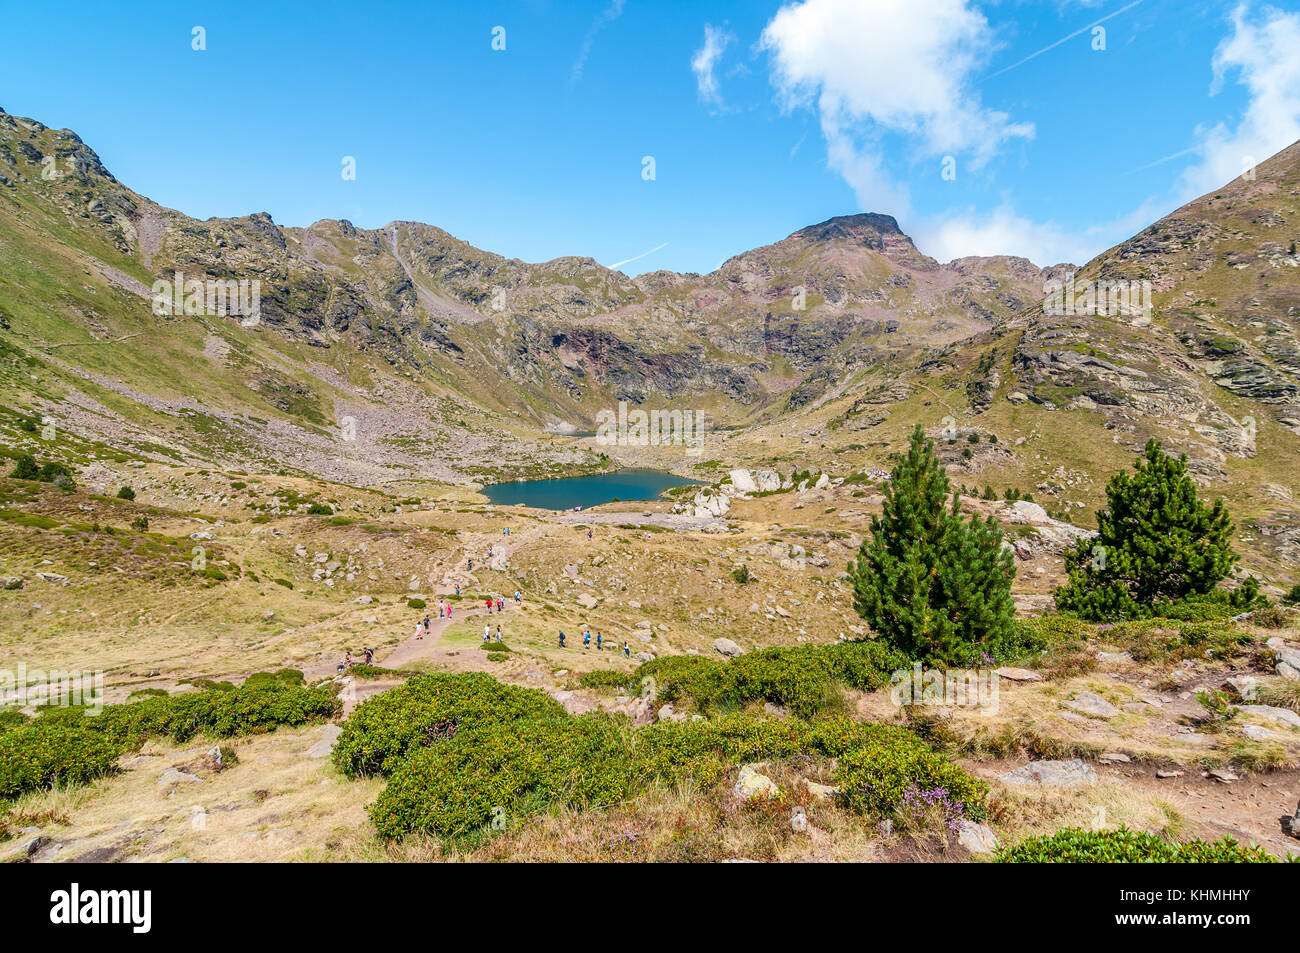 view of high mountain lake called 'Estany del mig' - midle lake,  near Ordino with some people hiking and two mountain pine on the right hand, Tristai Stock Photo